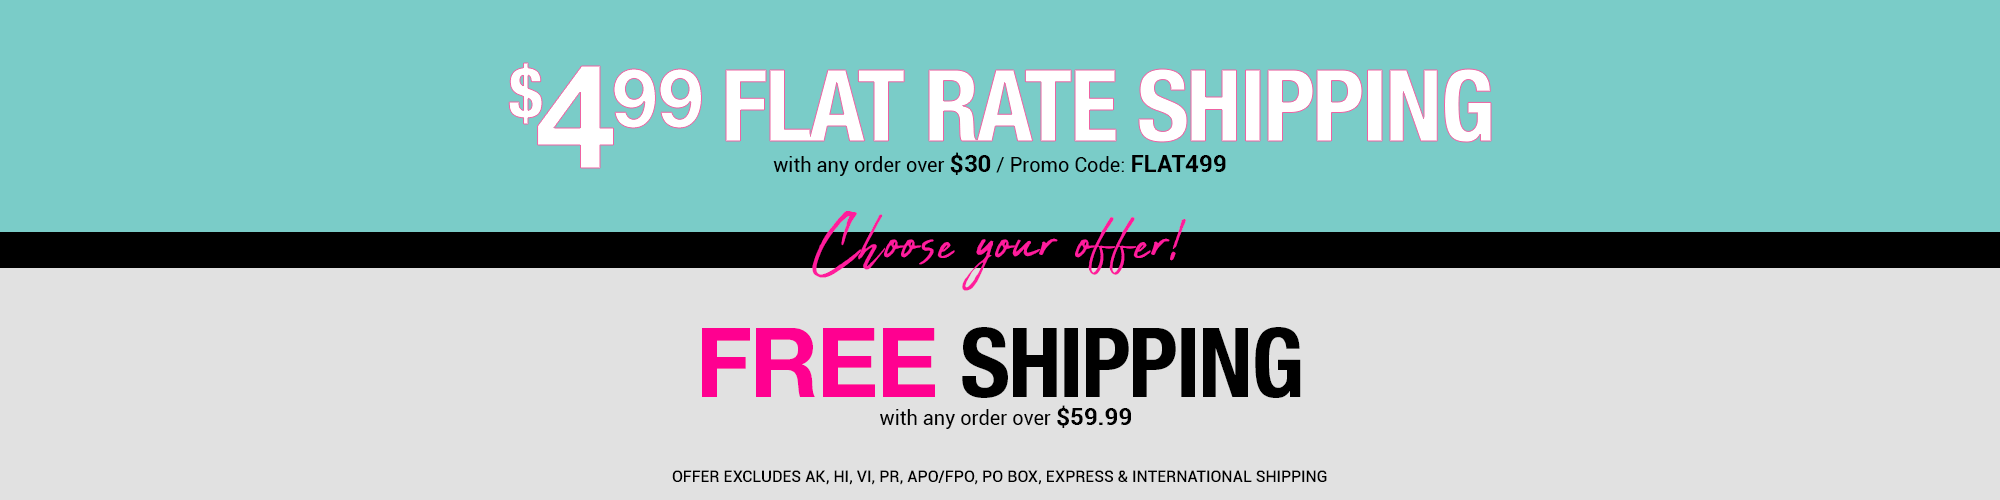 $4.99 FLAT RATE SHIPPING